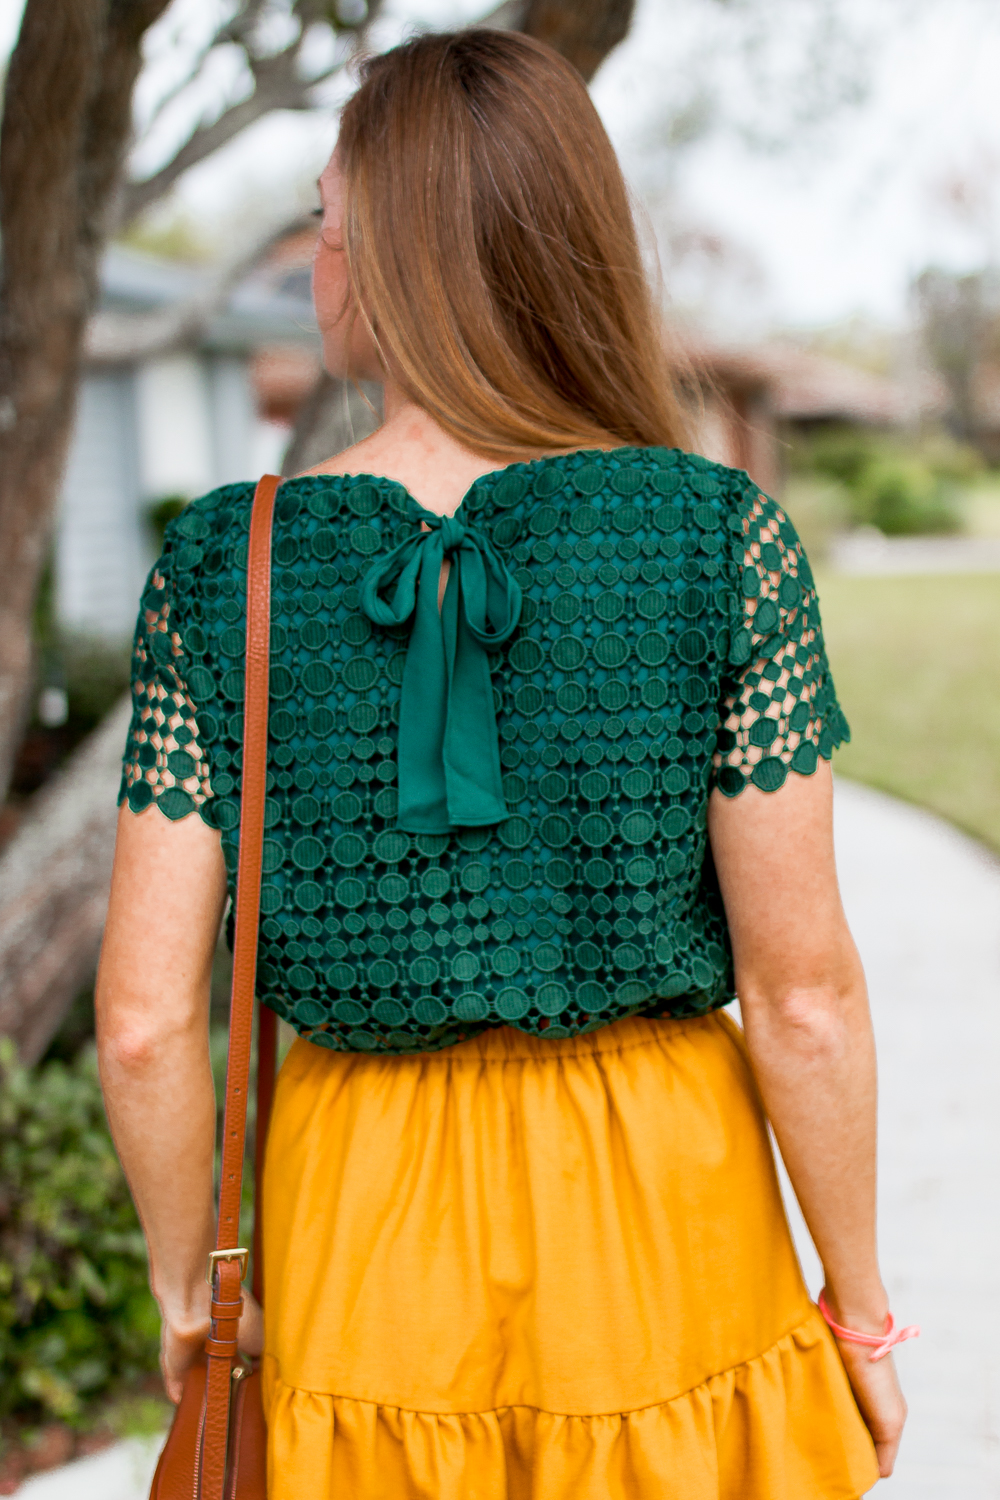 Mixing and Matching Seasonal Colors into Your Wardrobe | How to Dress for Fall | How to Incorporate Fall Colors in Your Wardrobe | Fall Outfit Ideas 2018 | Mustard Ruffle Skirt | Emerald Top with Bow Tie - Sunshine Style